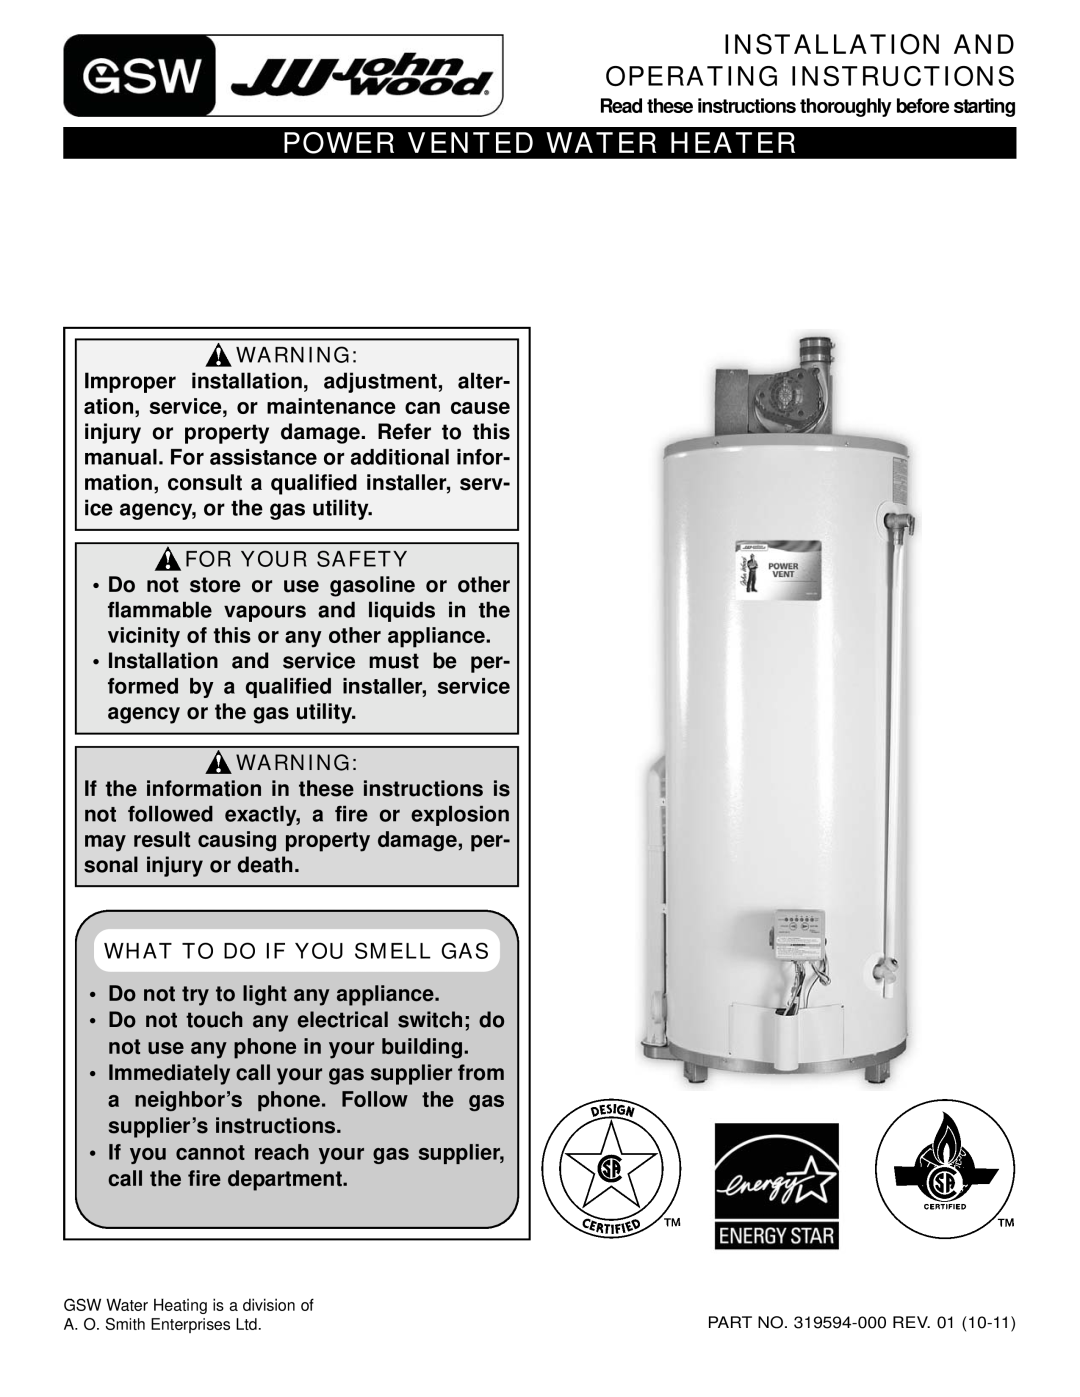 GSW 319594-000 manual For Your Safety, What To Do If You Smell Gas, Do not try to light any appliance 